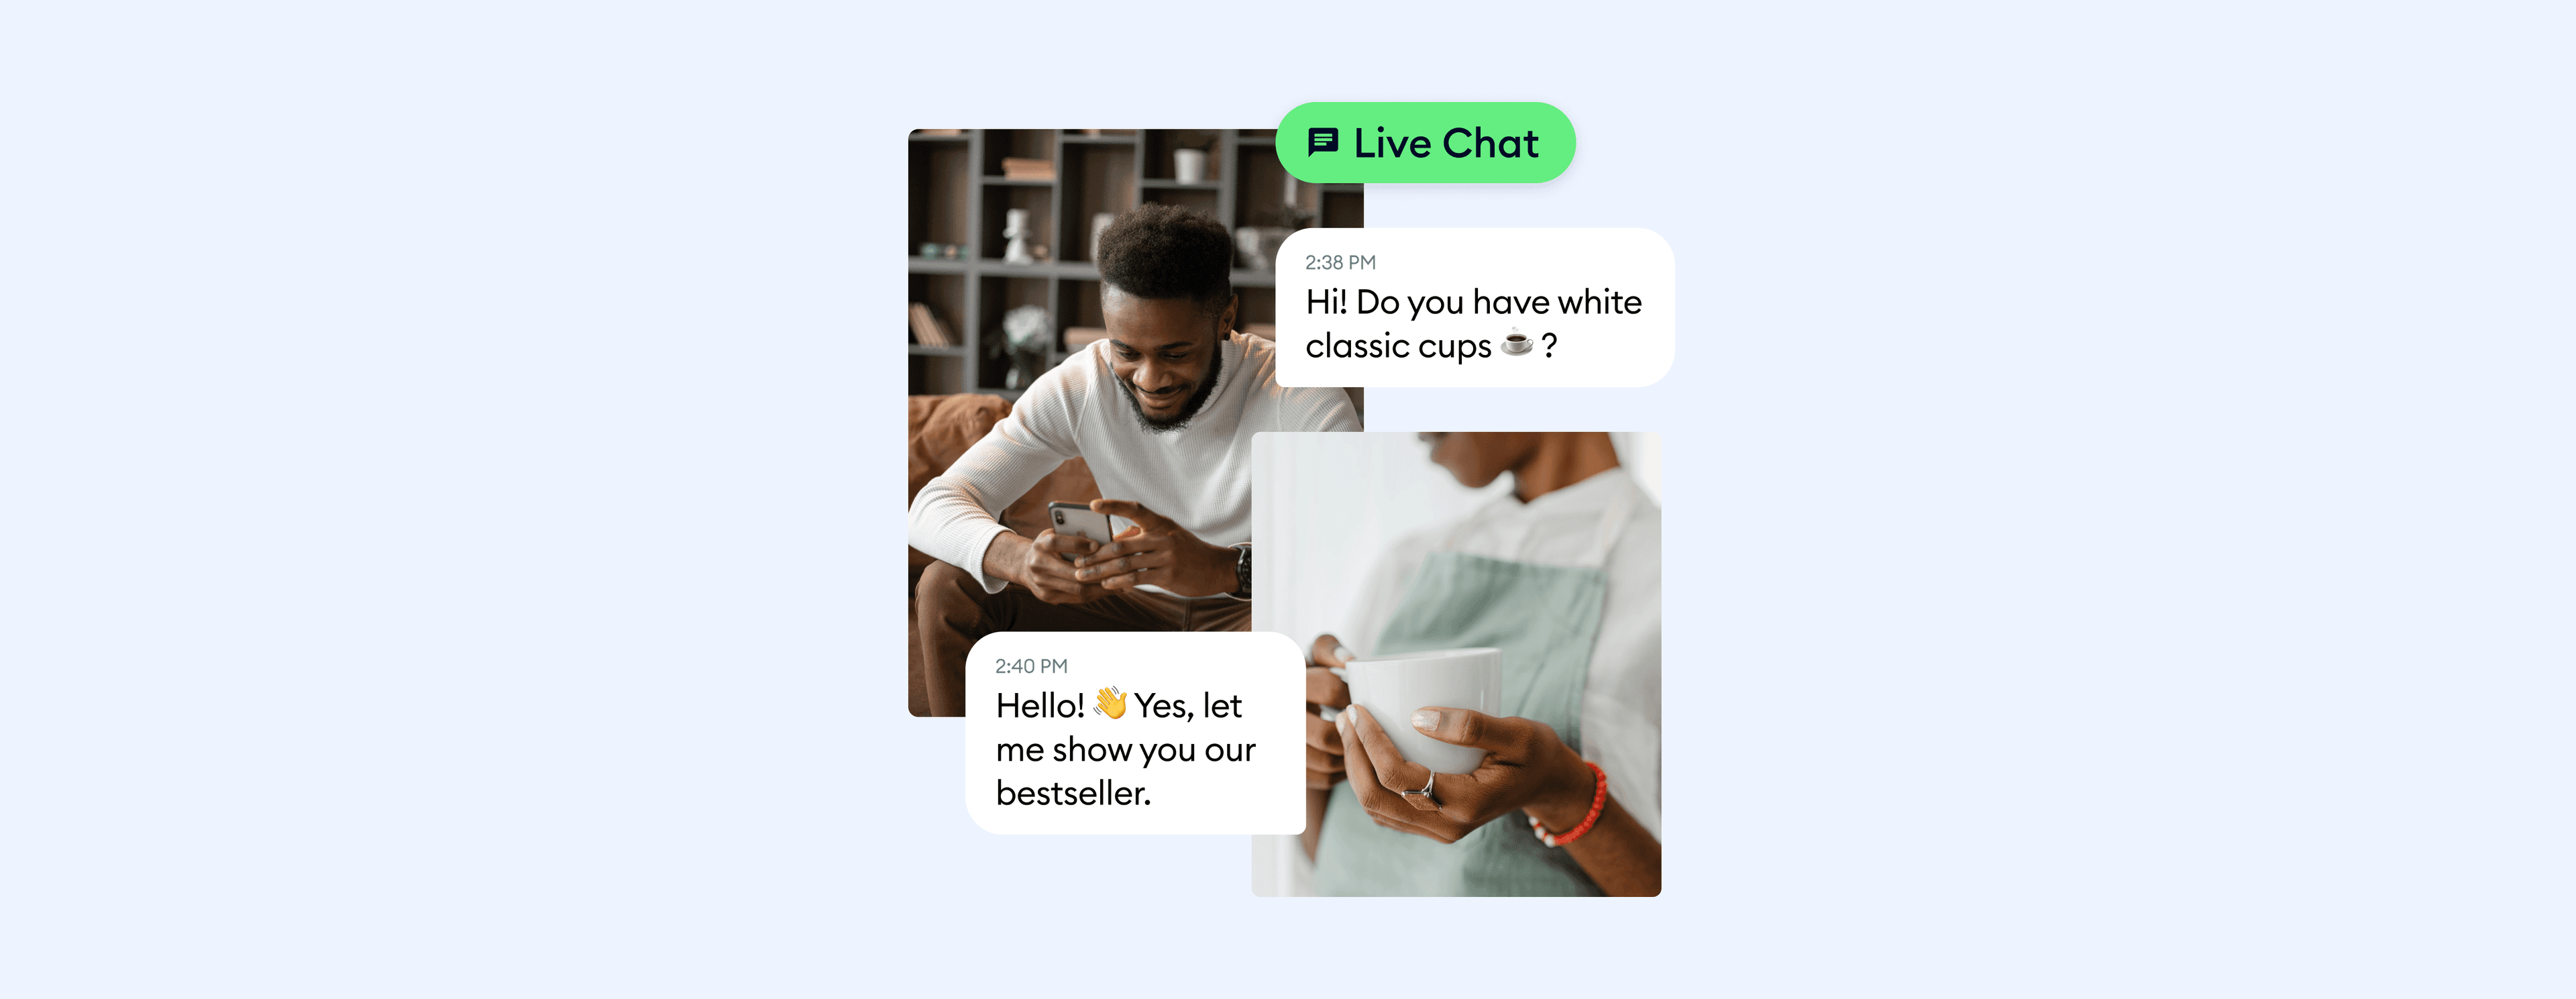 live chat apps cover image